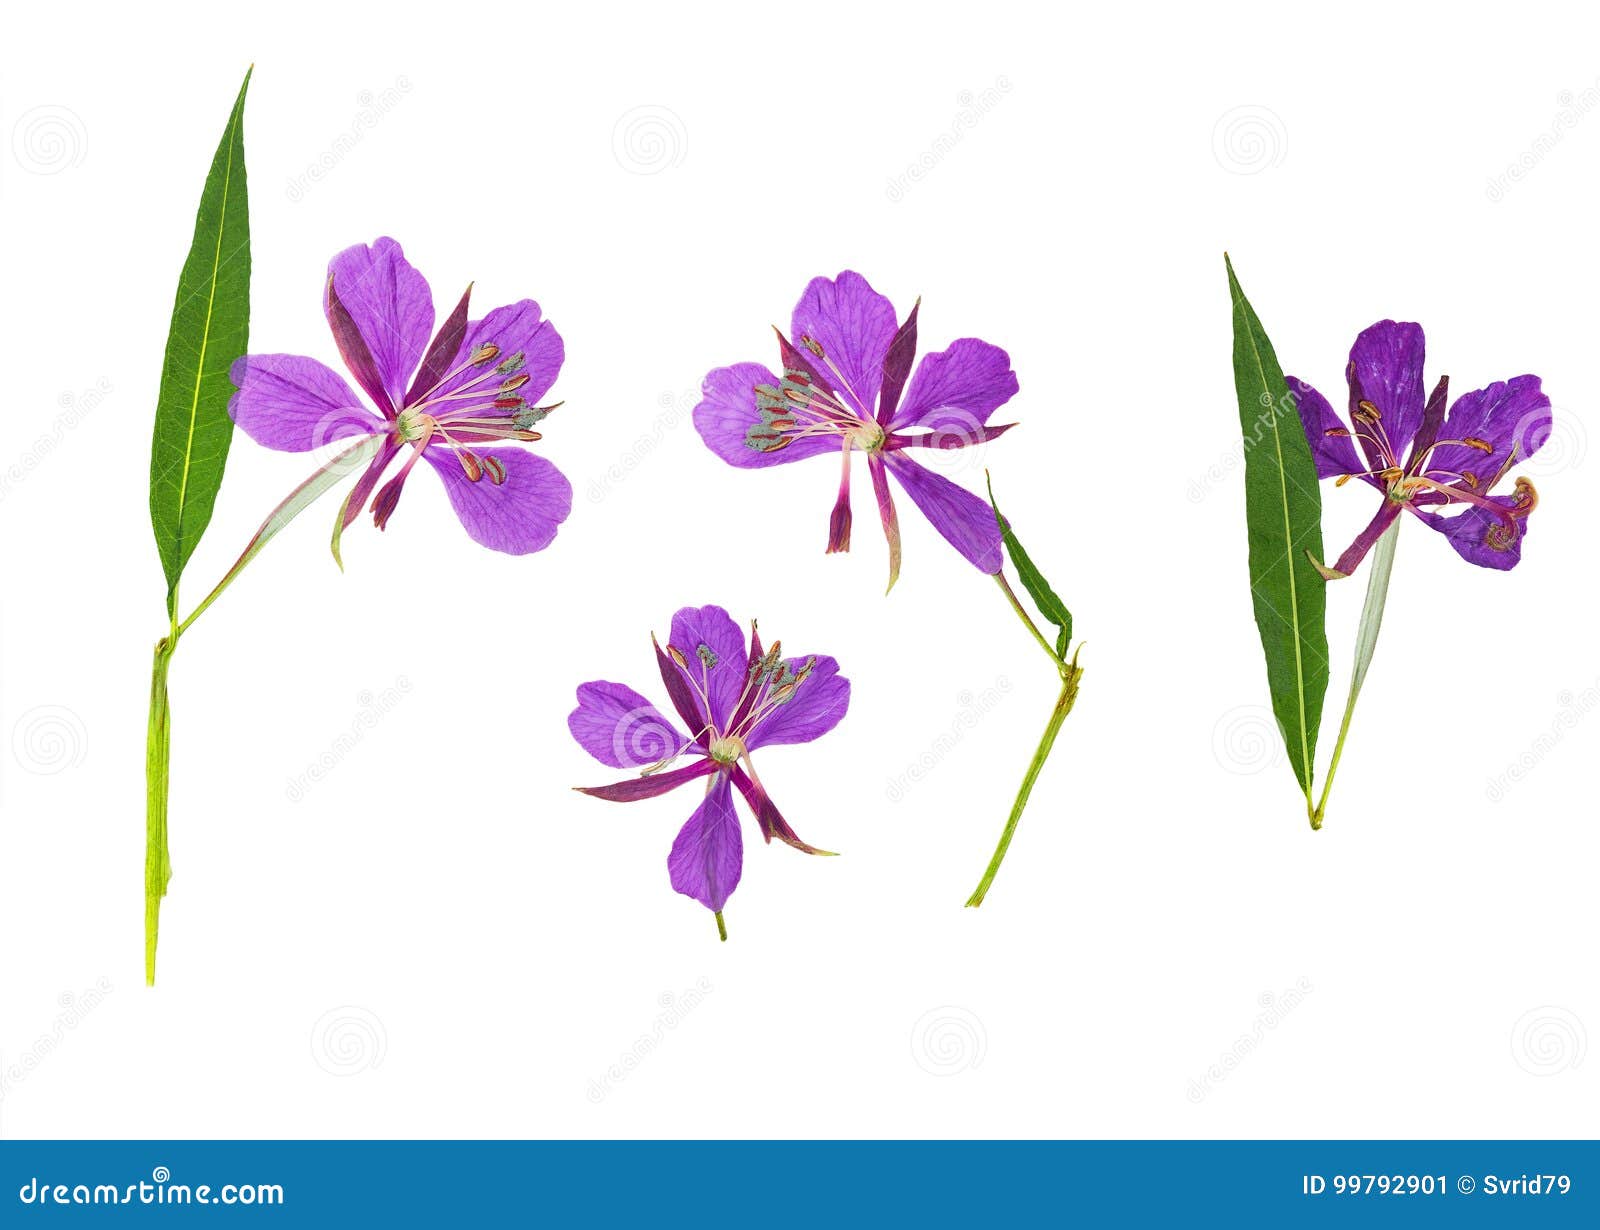 Pressed And Dried Delicate Purple Flowers Willow-herb Epilobium Stock ...